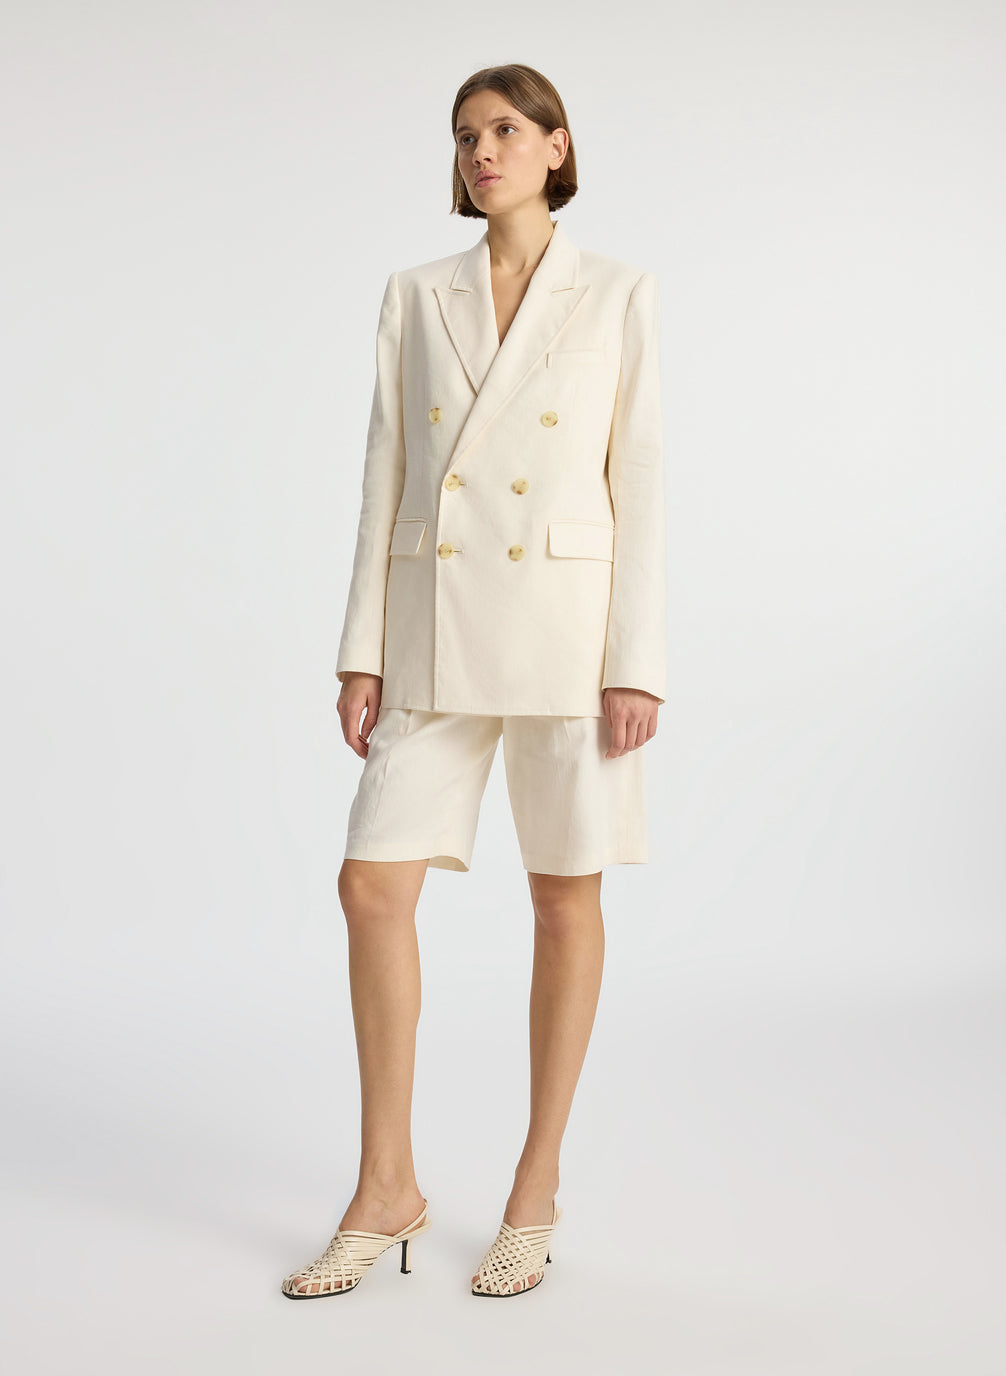 side view of woman wearing cream shorts suit